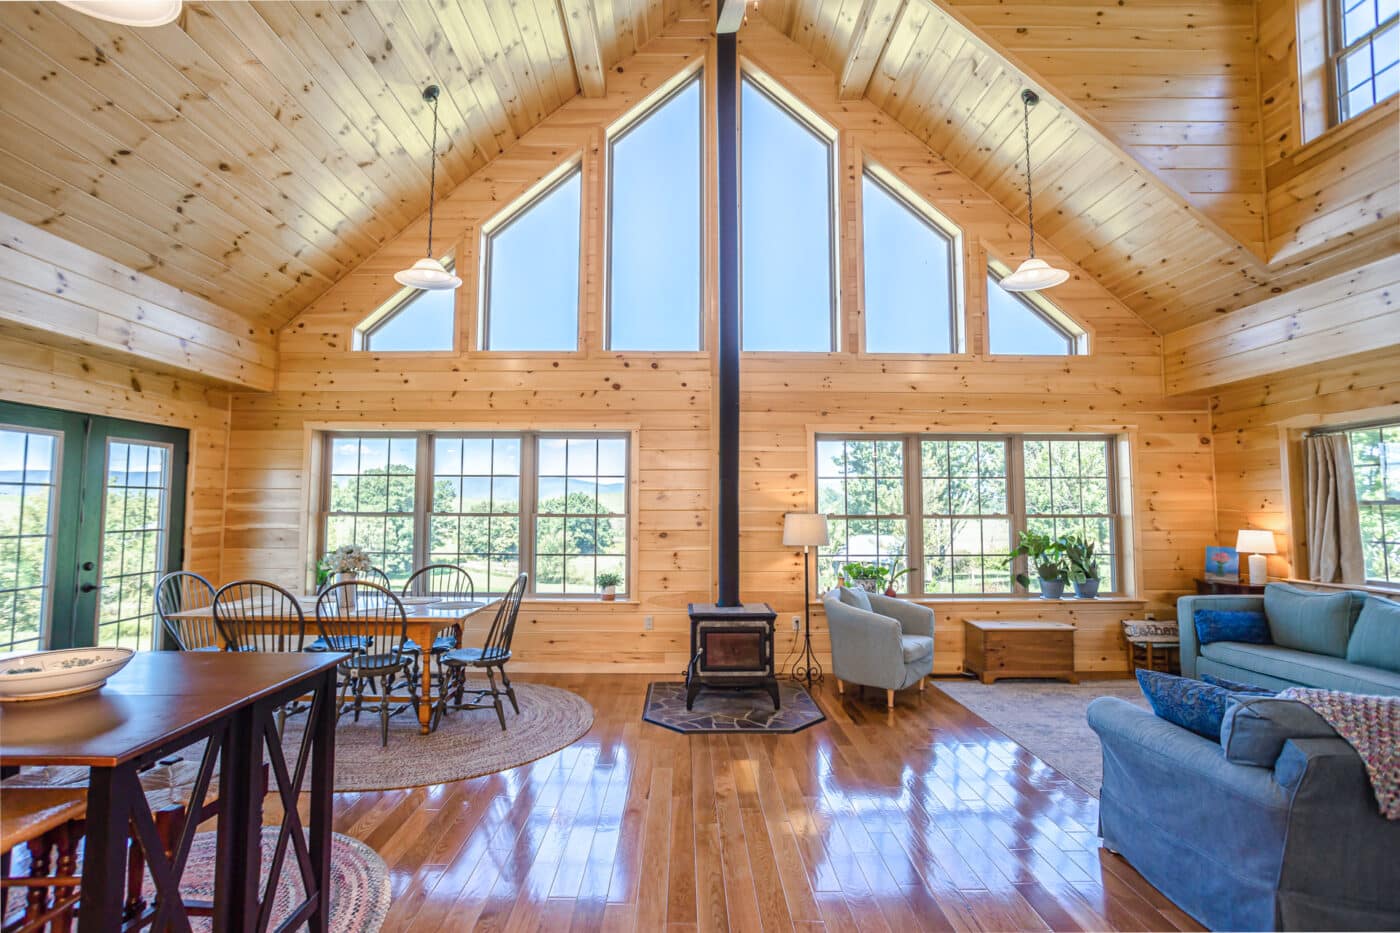 the interior of a log cabin style in colorado